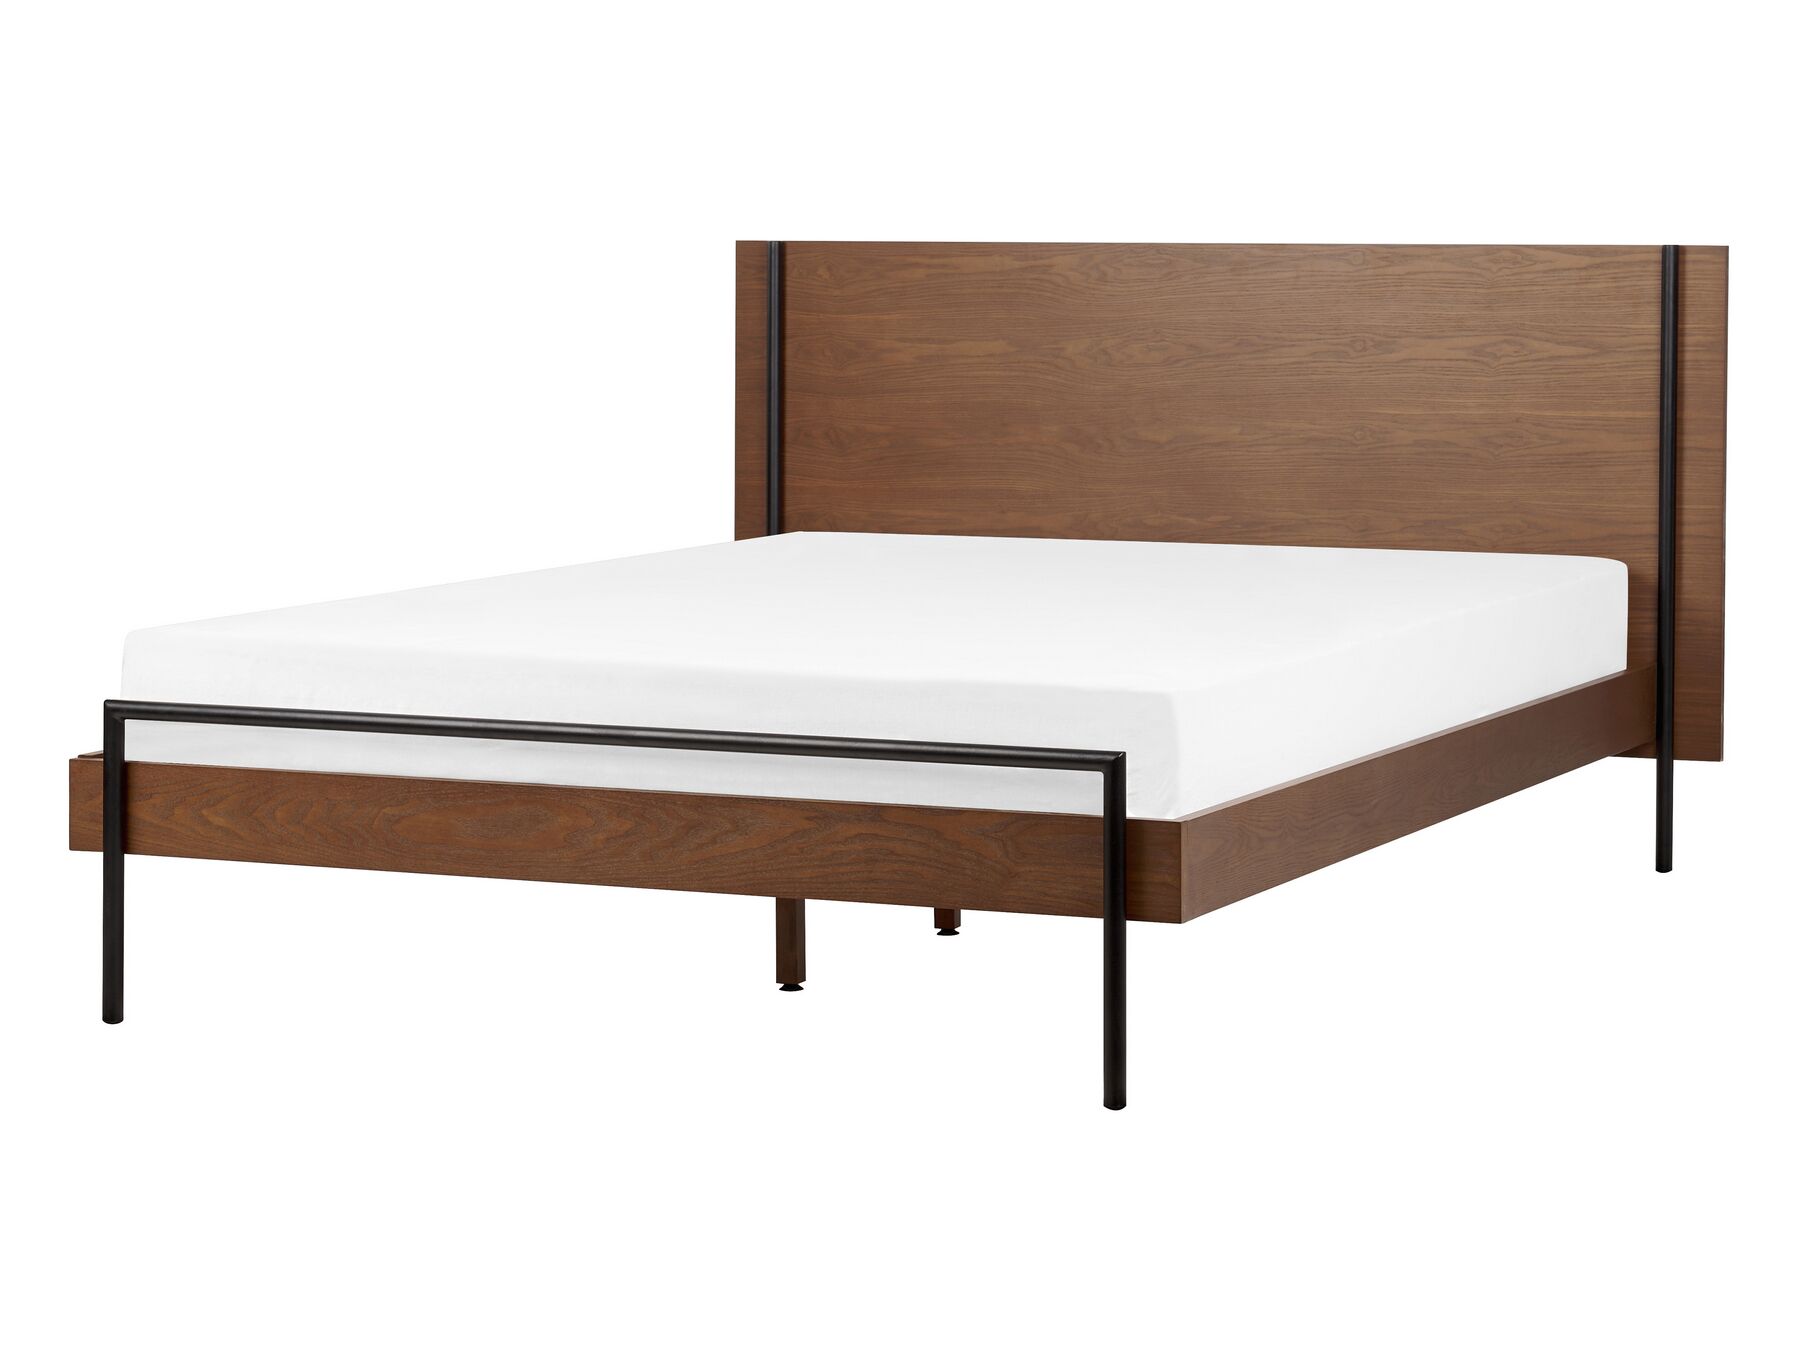 Bed hout donkerbruin 140 x 200 cm LIBERMONT_912673